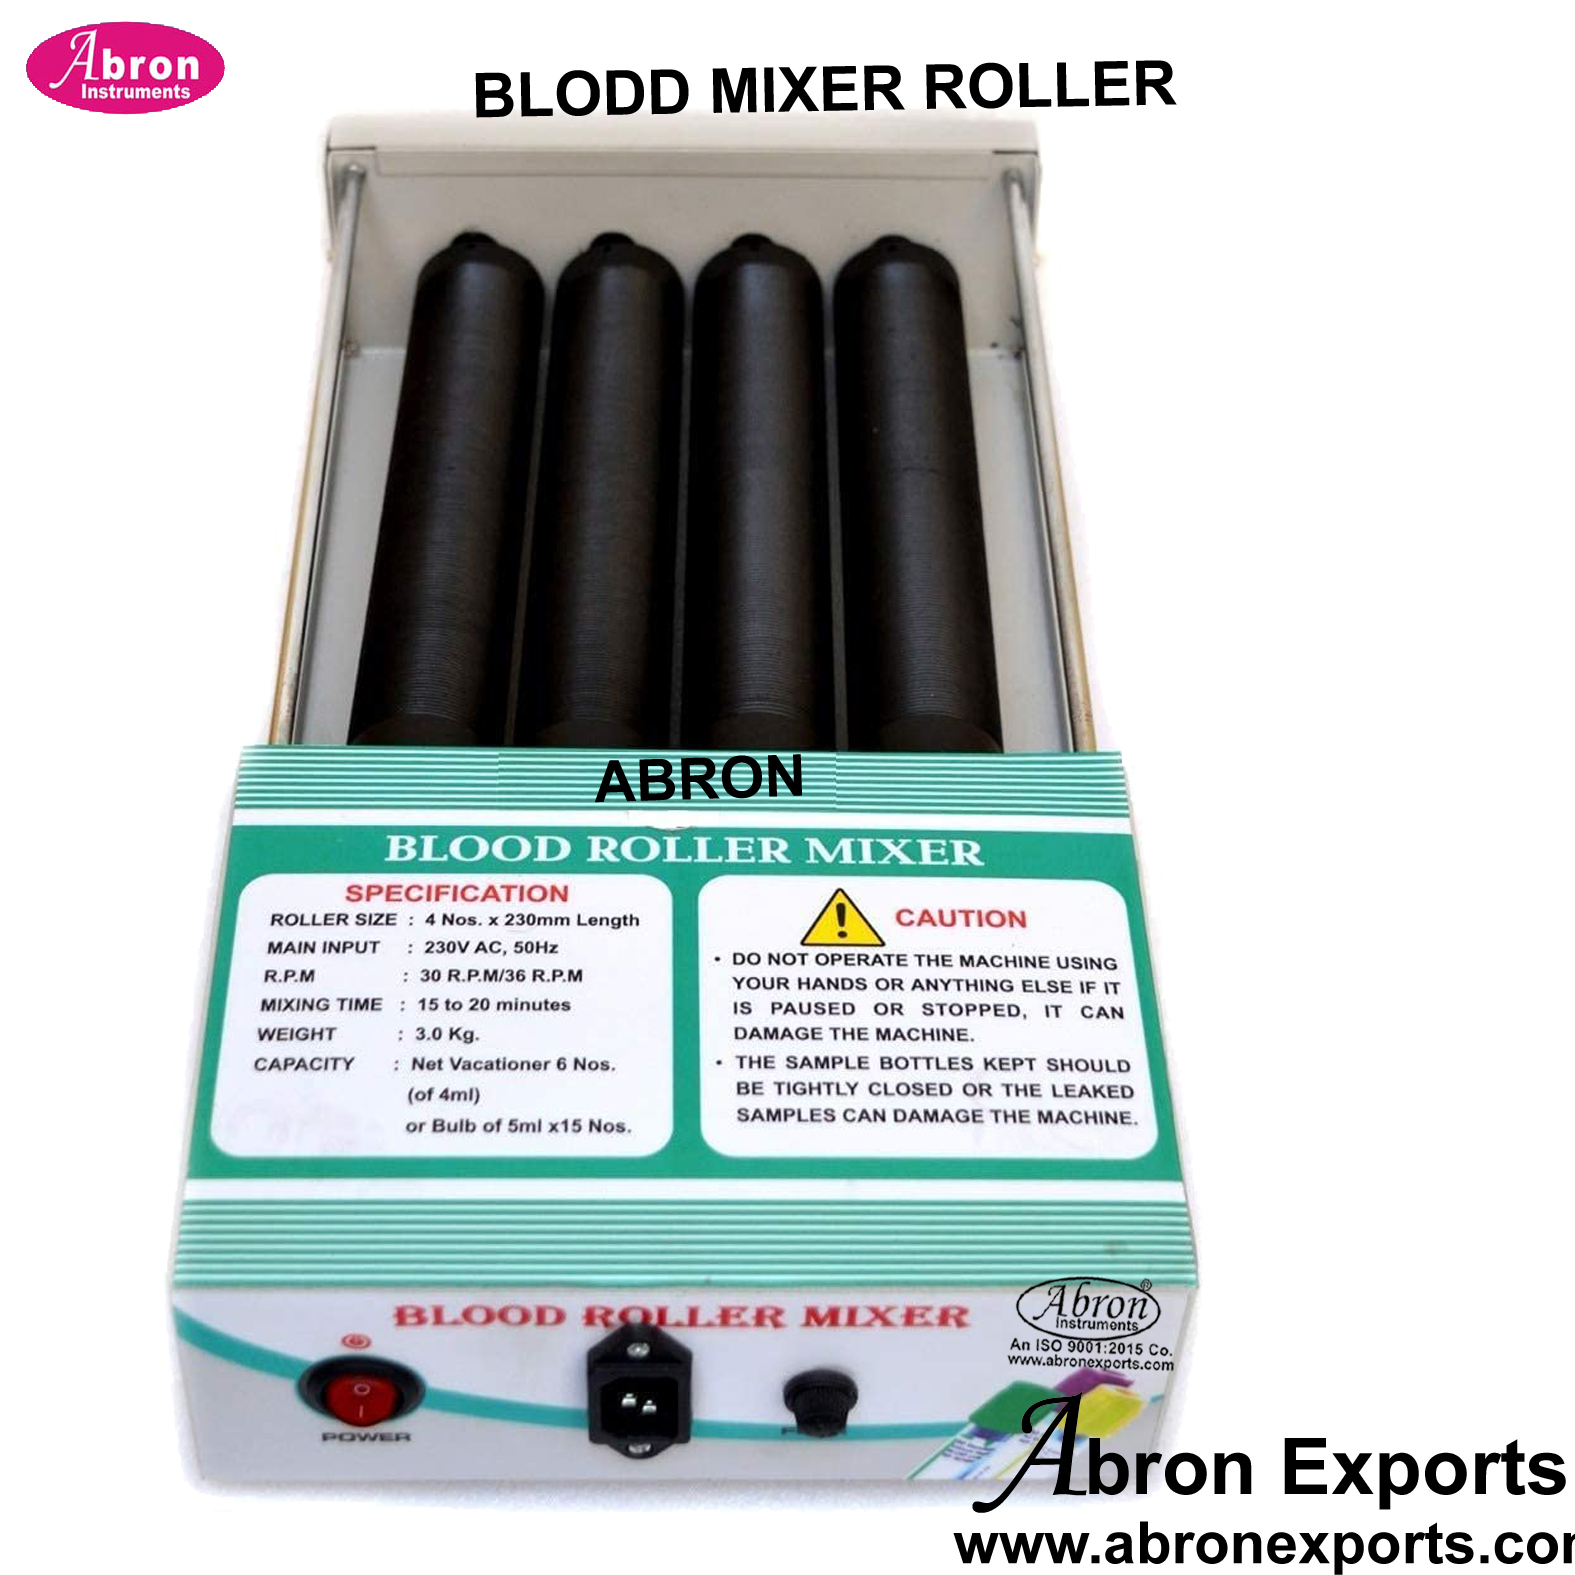 Blood Mixer Roller Tube Mixer Spin for Mixing Tube 4x 230mm Rollers Speed 30 RPM bank Hospital Nursing Home Medical Abron ABM-2795R4 